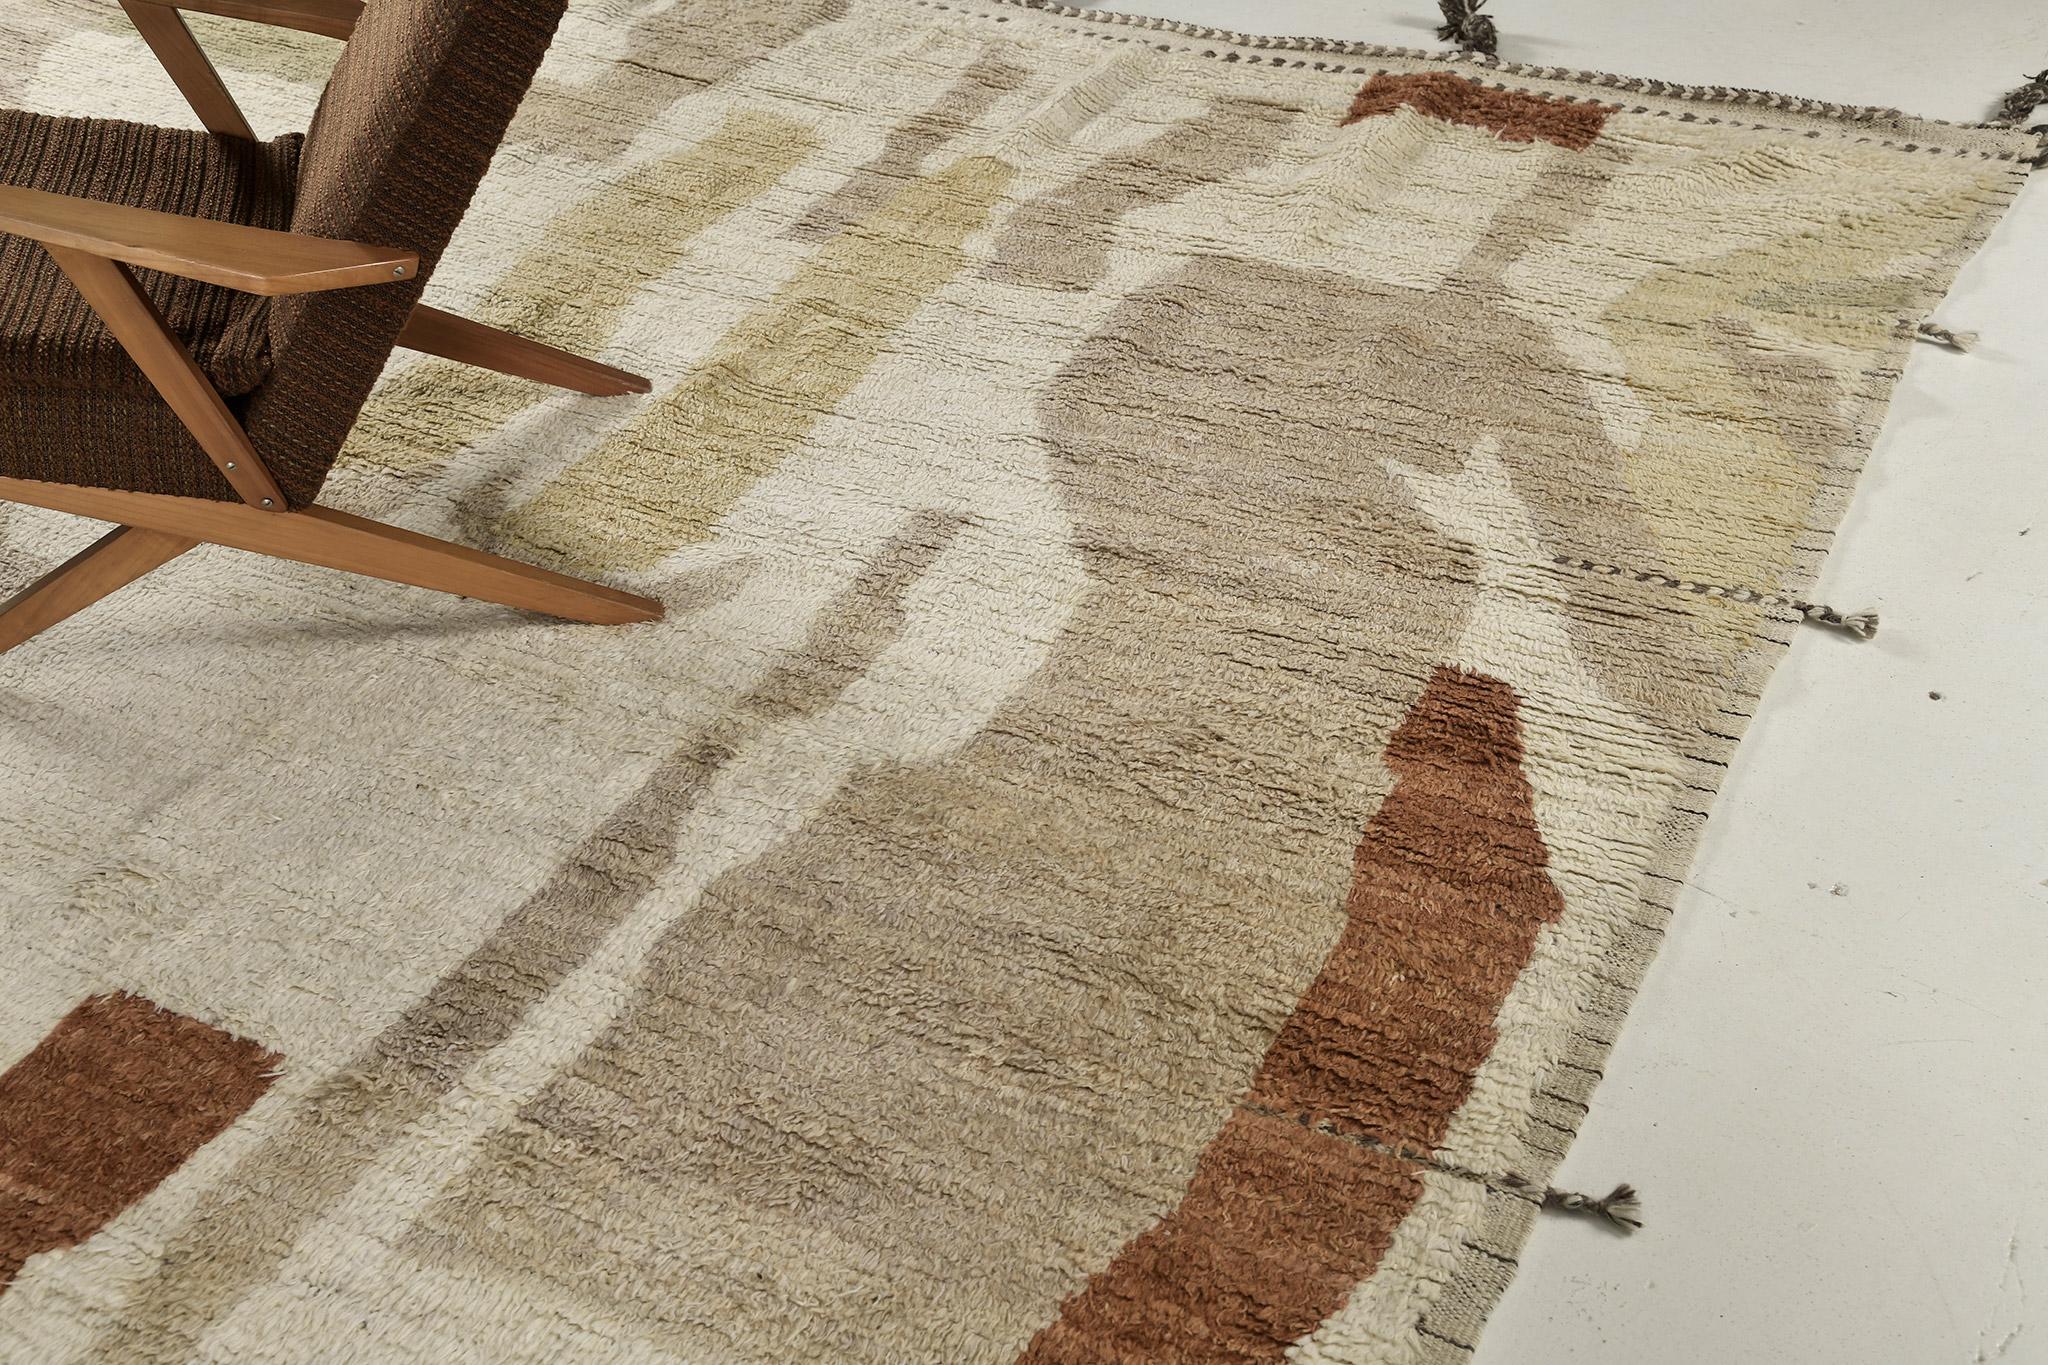 Sittima is a natural earth toned pile weave and modern-day interpretation of the Moroccan world. The rug's irregular shapes and strokes resemble the fibers of nature and their ability to be used for crafts such as cords and basketry. Designed in Los